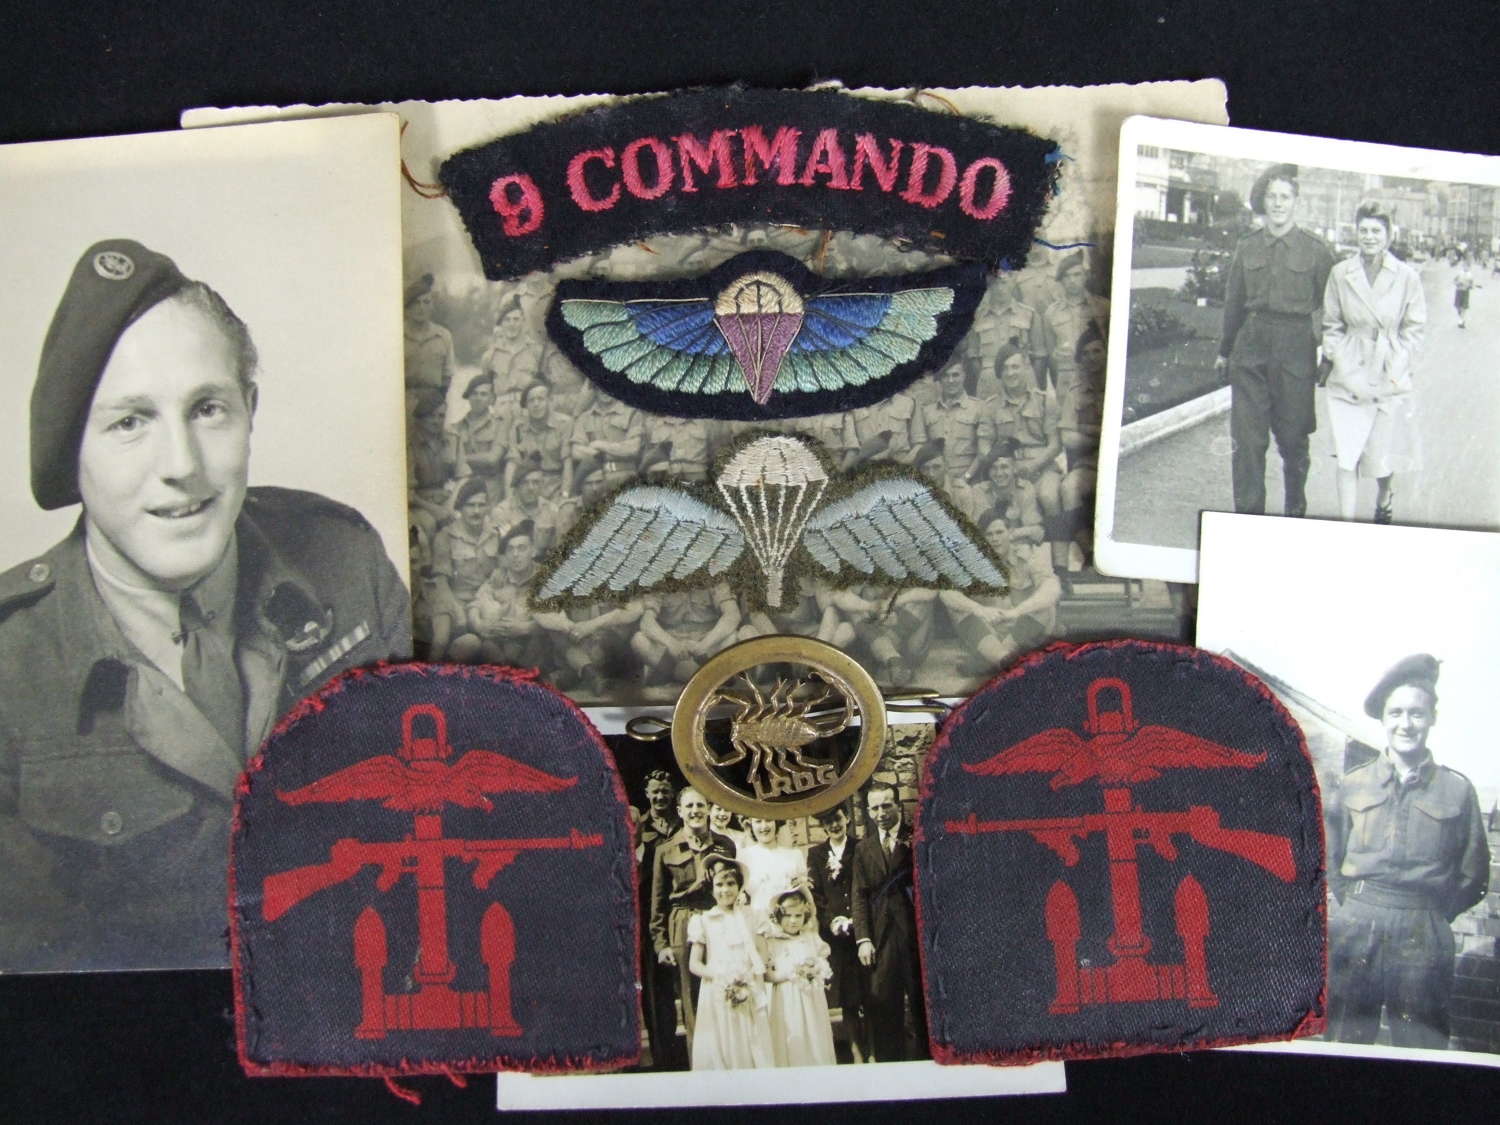 Exception L.R.D.G., S.A.S and 9 Commando Collection